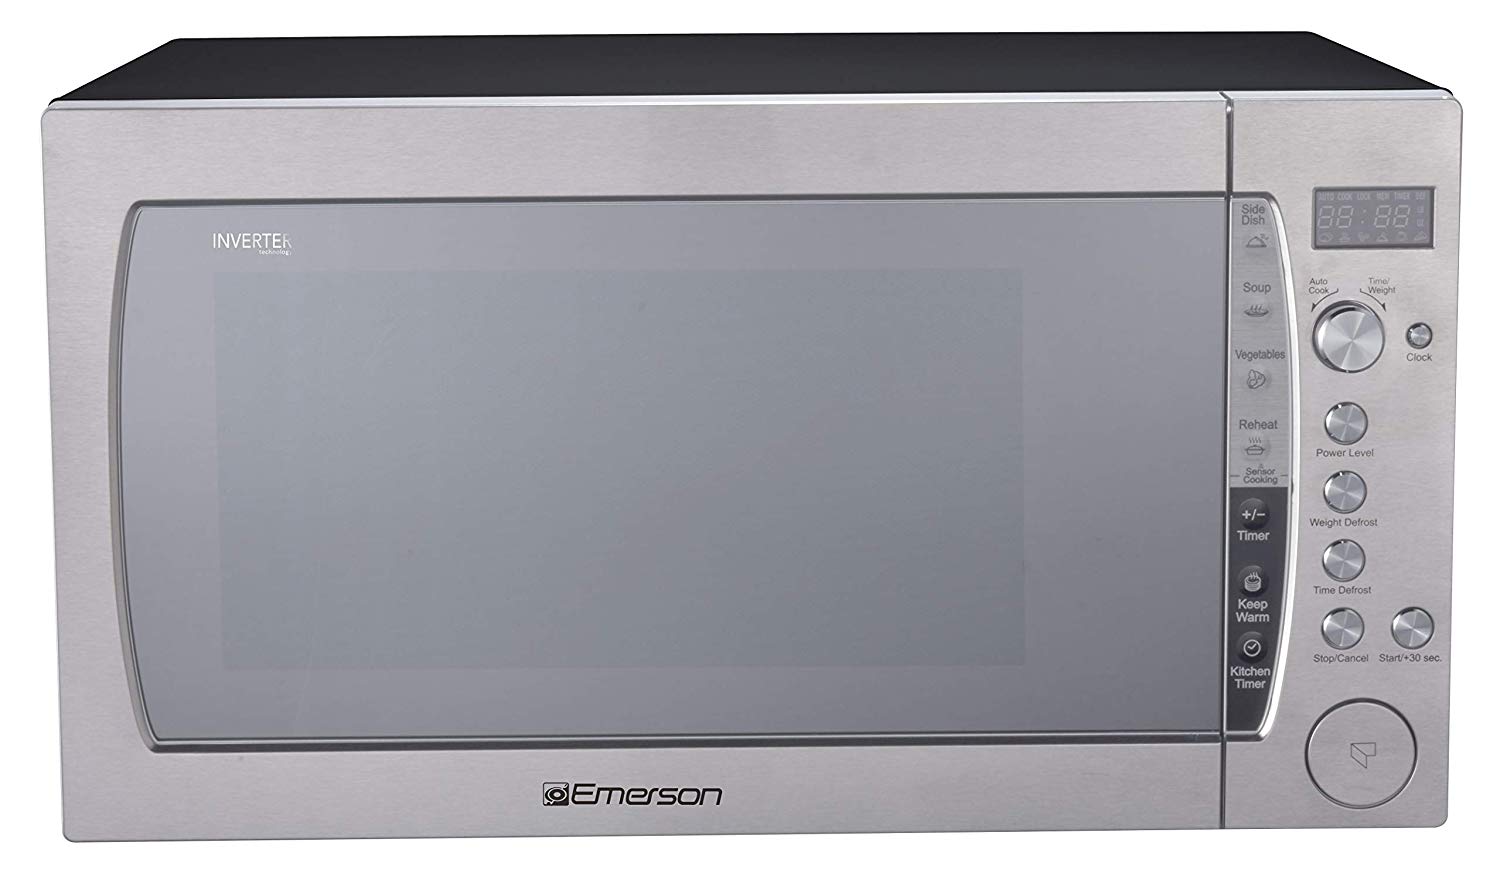 Emerson ER105006 2.2 Cu Ft 1200 W Counter top Microwave Oven with Inverter Technology & Sensor Cooking, Silver